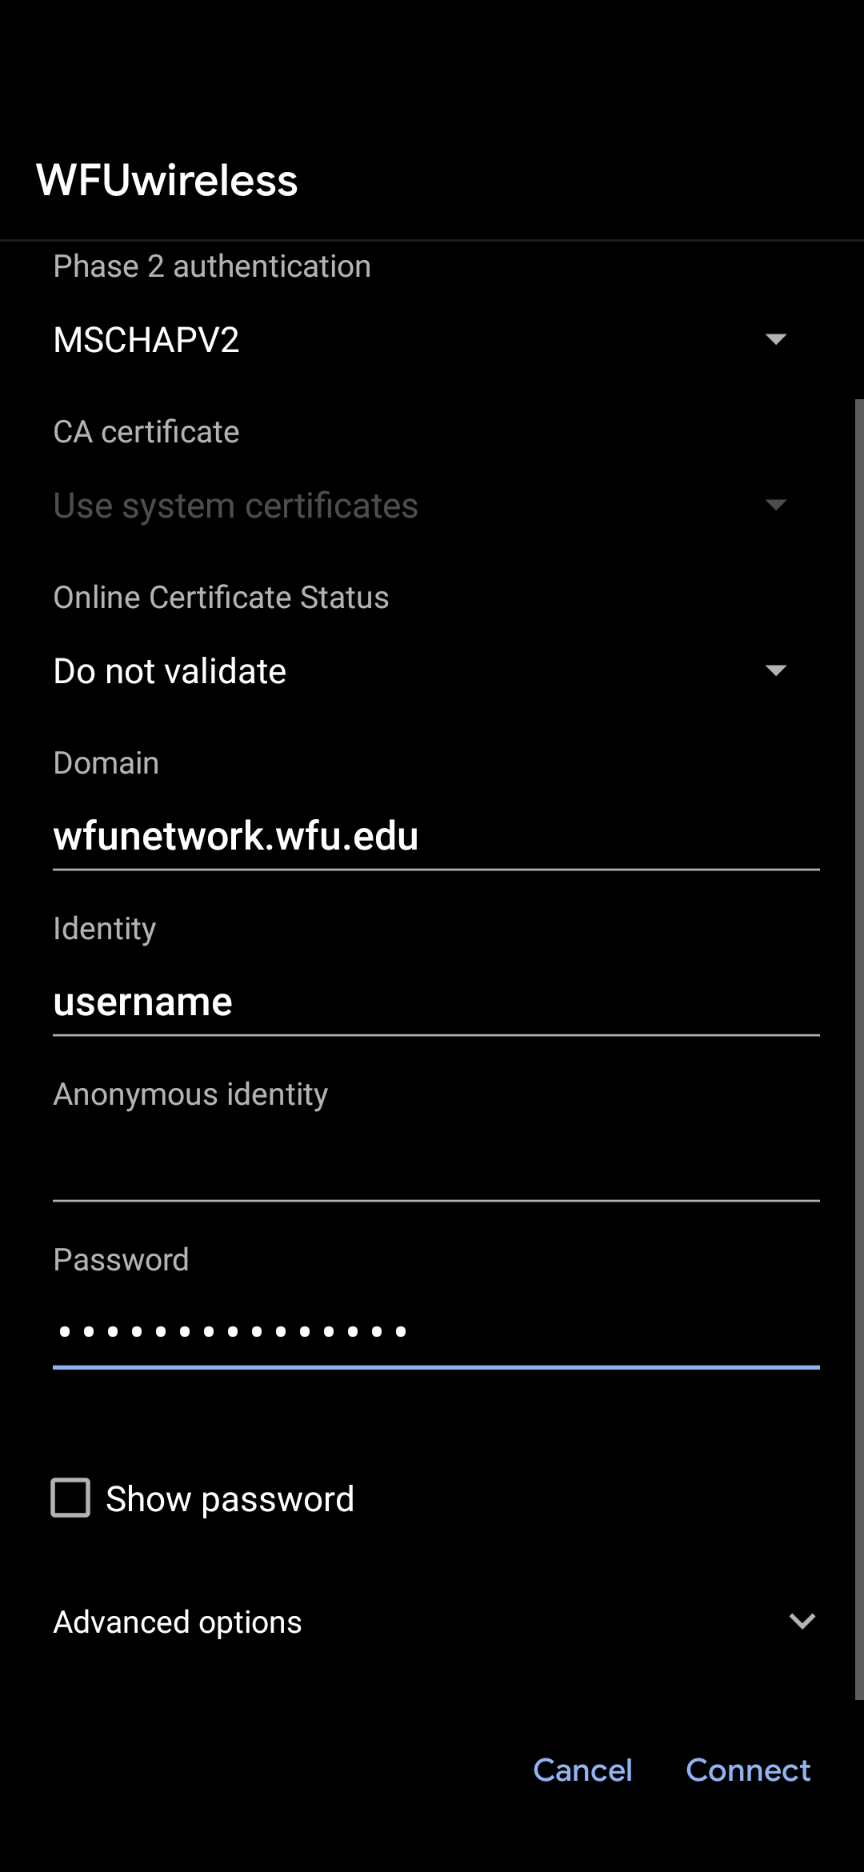 wfunetwork.wfu.edu in Domain field.  Username in Identity field and account password in Password field. 